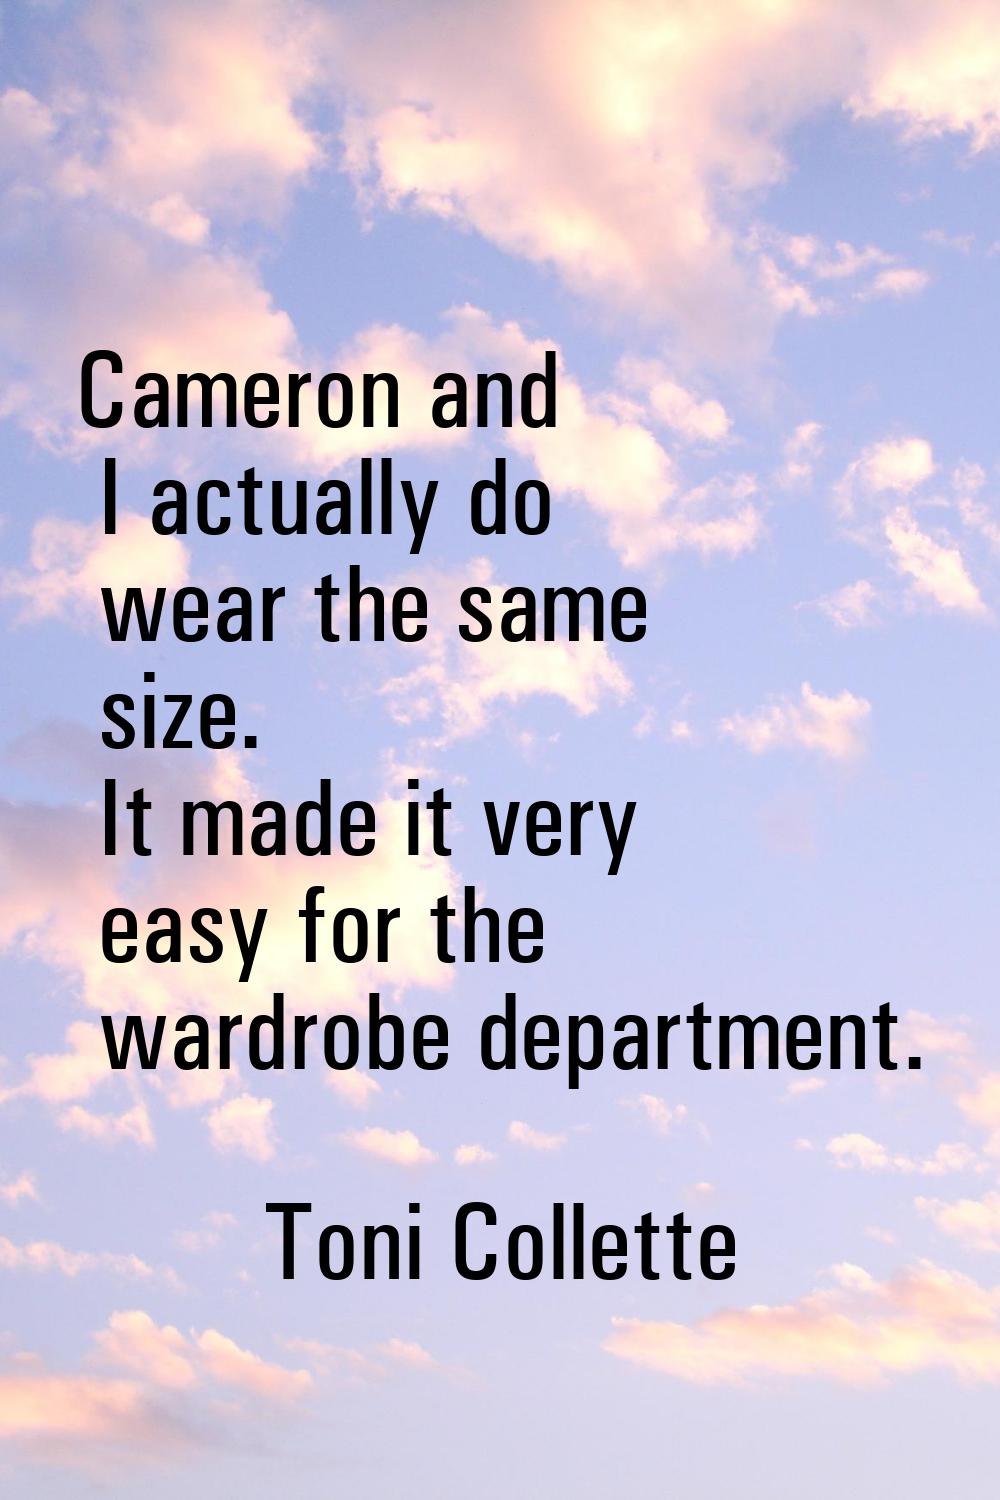 Cameron and I actually do wear the same size. It made it very easy for the wardrobe department.